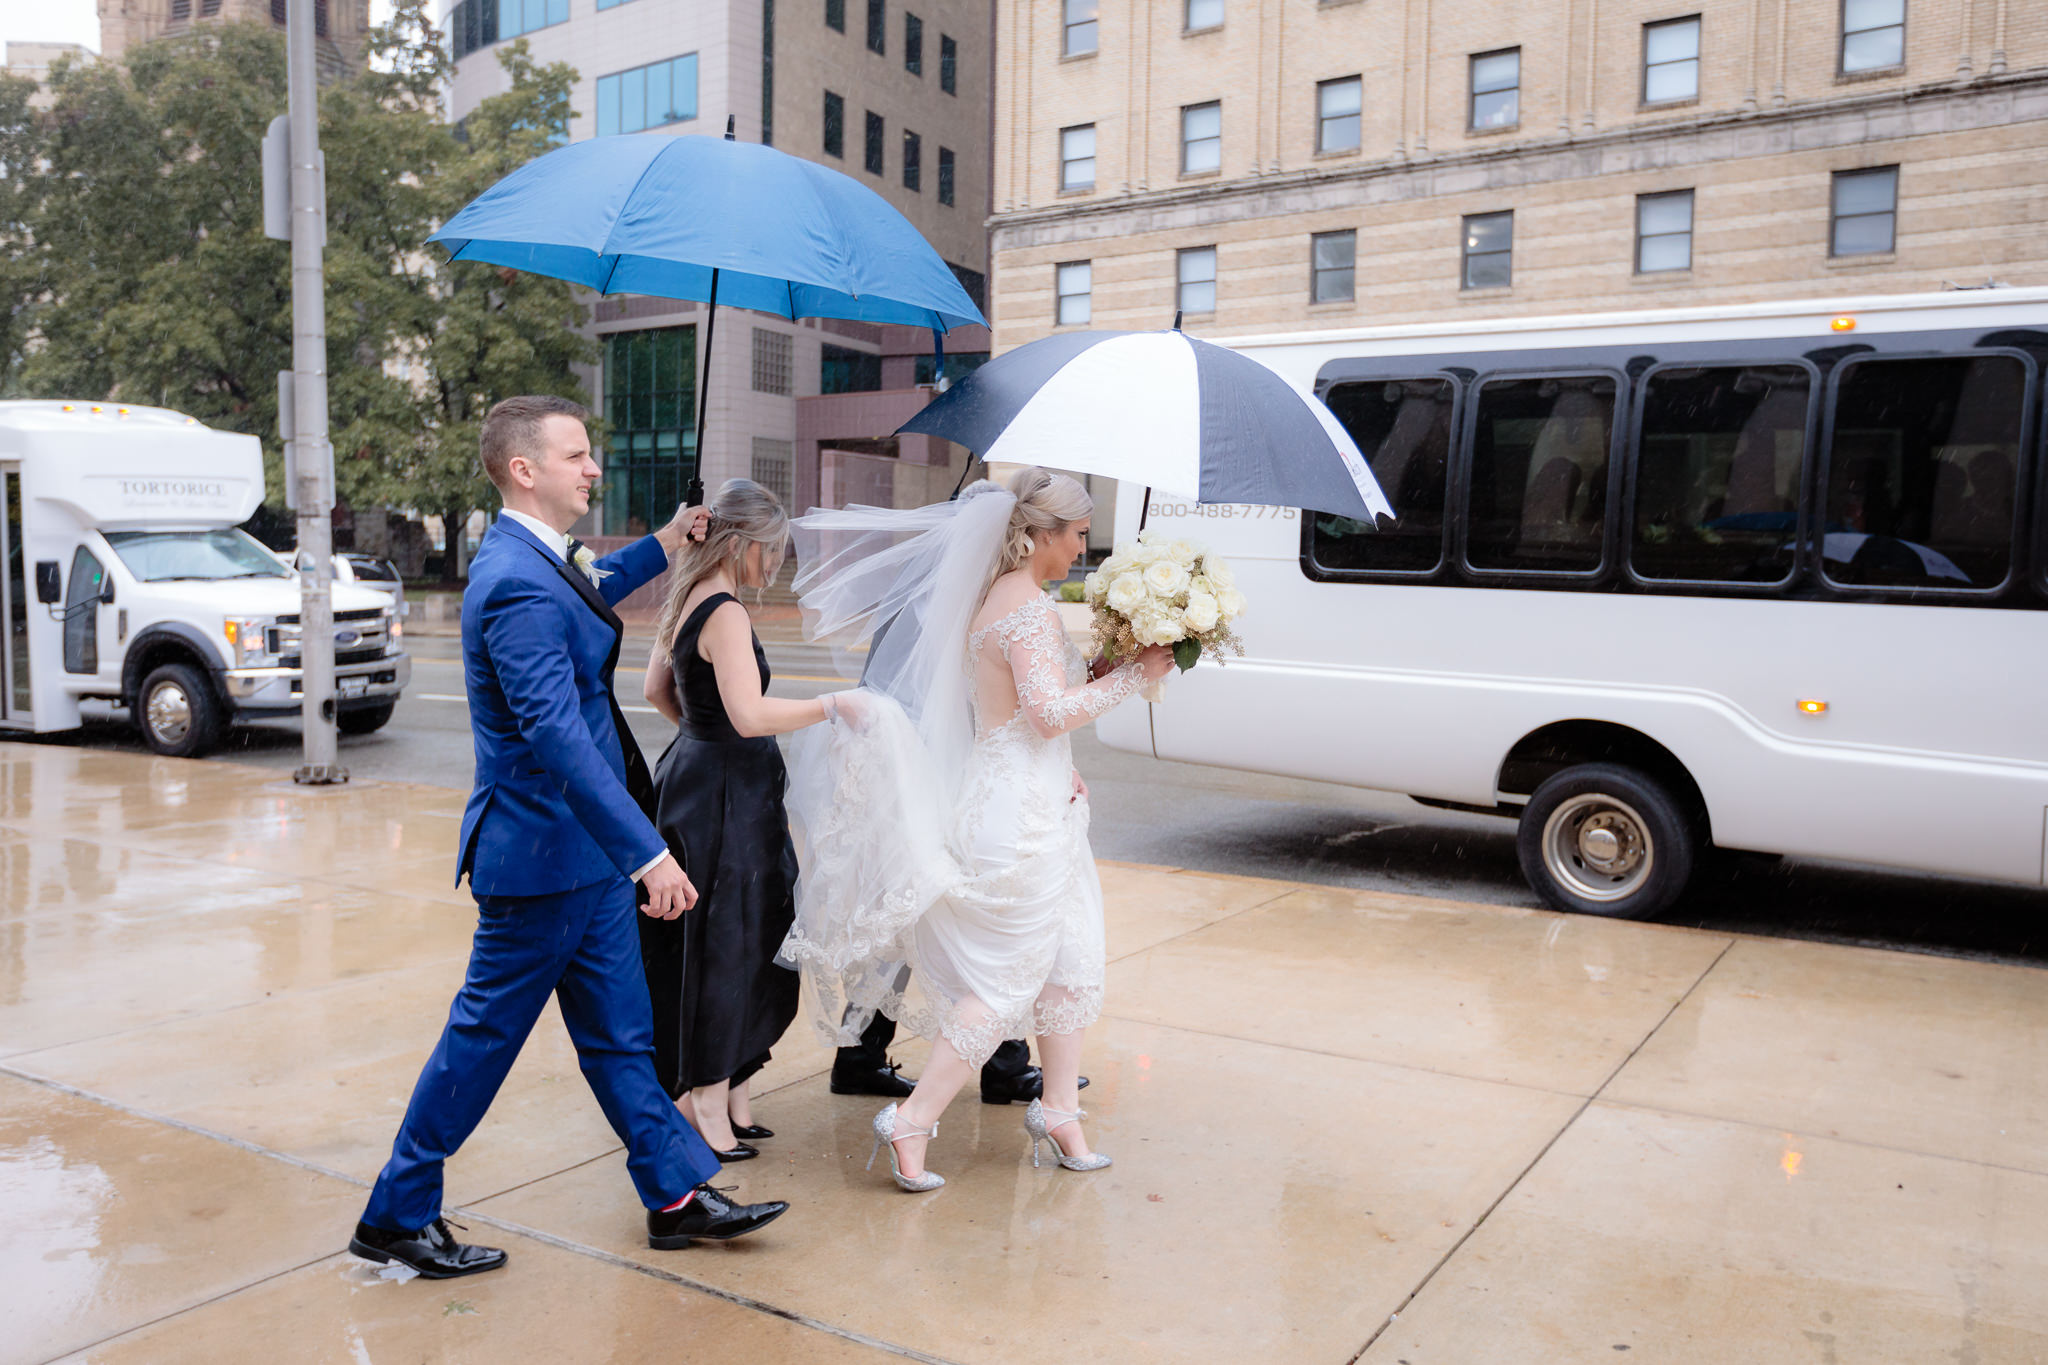 Newlyweds walk to the limo in the rain before their Soldiers & Sailors wedding